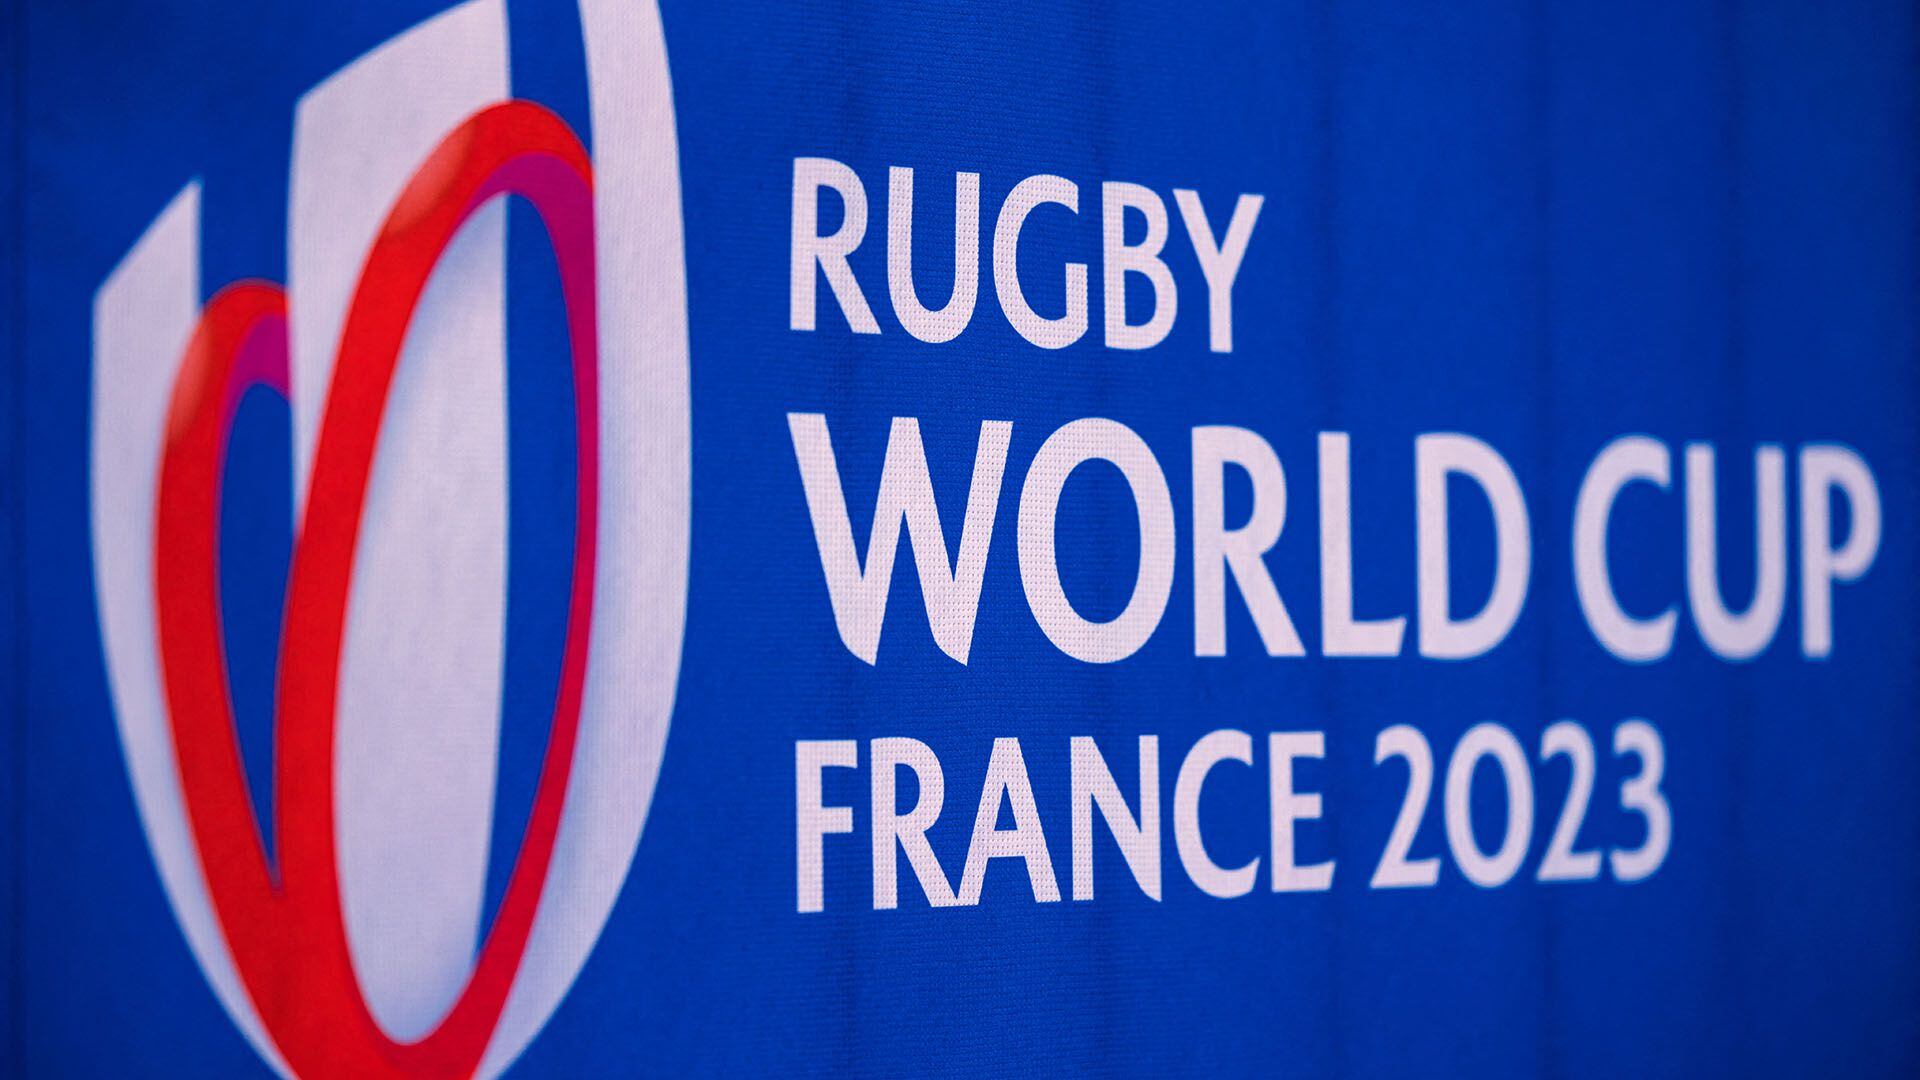 rugby world cup logo